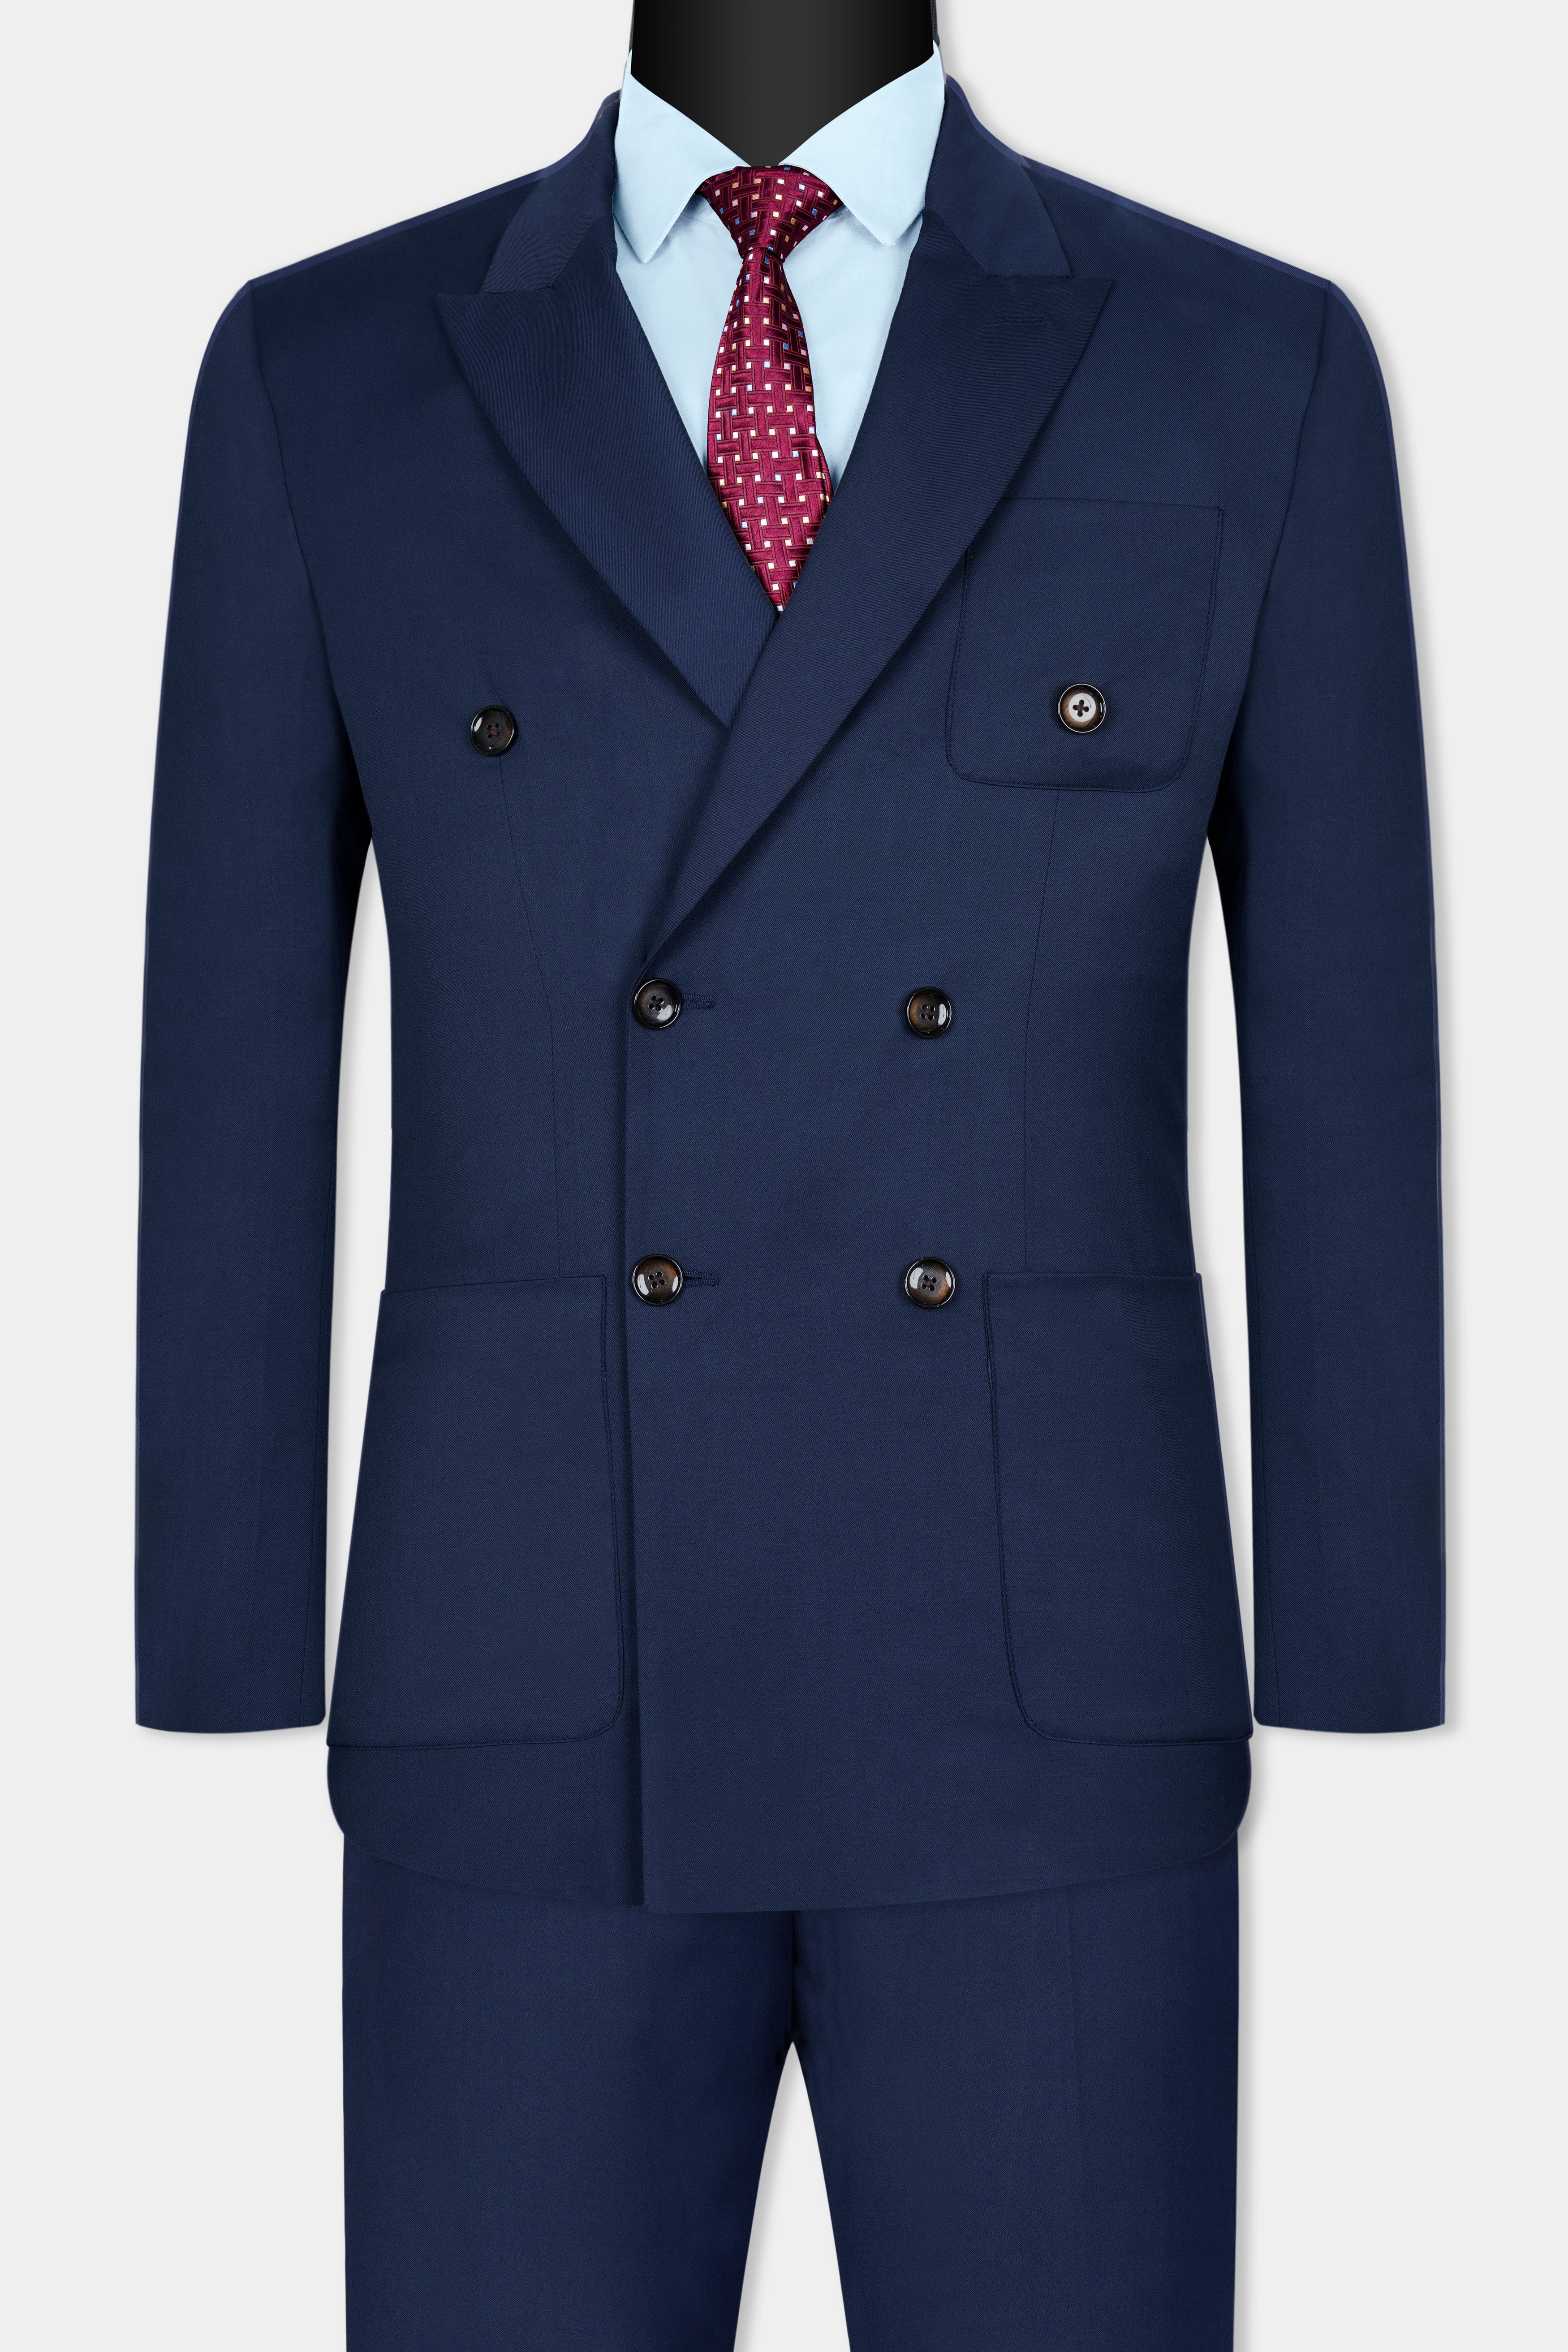 Cloud Burst Blue Wool Rich Double Breasted Sports Suit ST3075-DB-PP-36, ST3075-DB-PP-38, ST3075-DB-PP-40, ST3075-DB-PP-42, ST3075-DB-PP-44, ST3075-DB-PP-46, ST3075-DB-PP-48, ST3075-DB-PP-50, ST3075-DB-PP-52, ST3075-DB-PP-54, ST3075-DB-PP-56, ST3075-DB-PP-58, ST3075-DB-PP-60